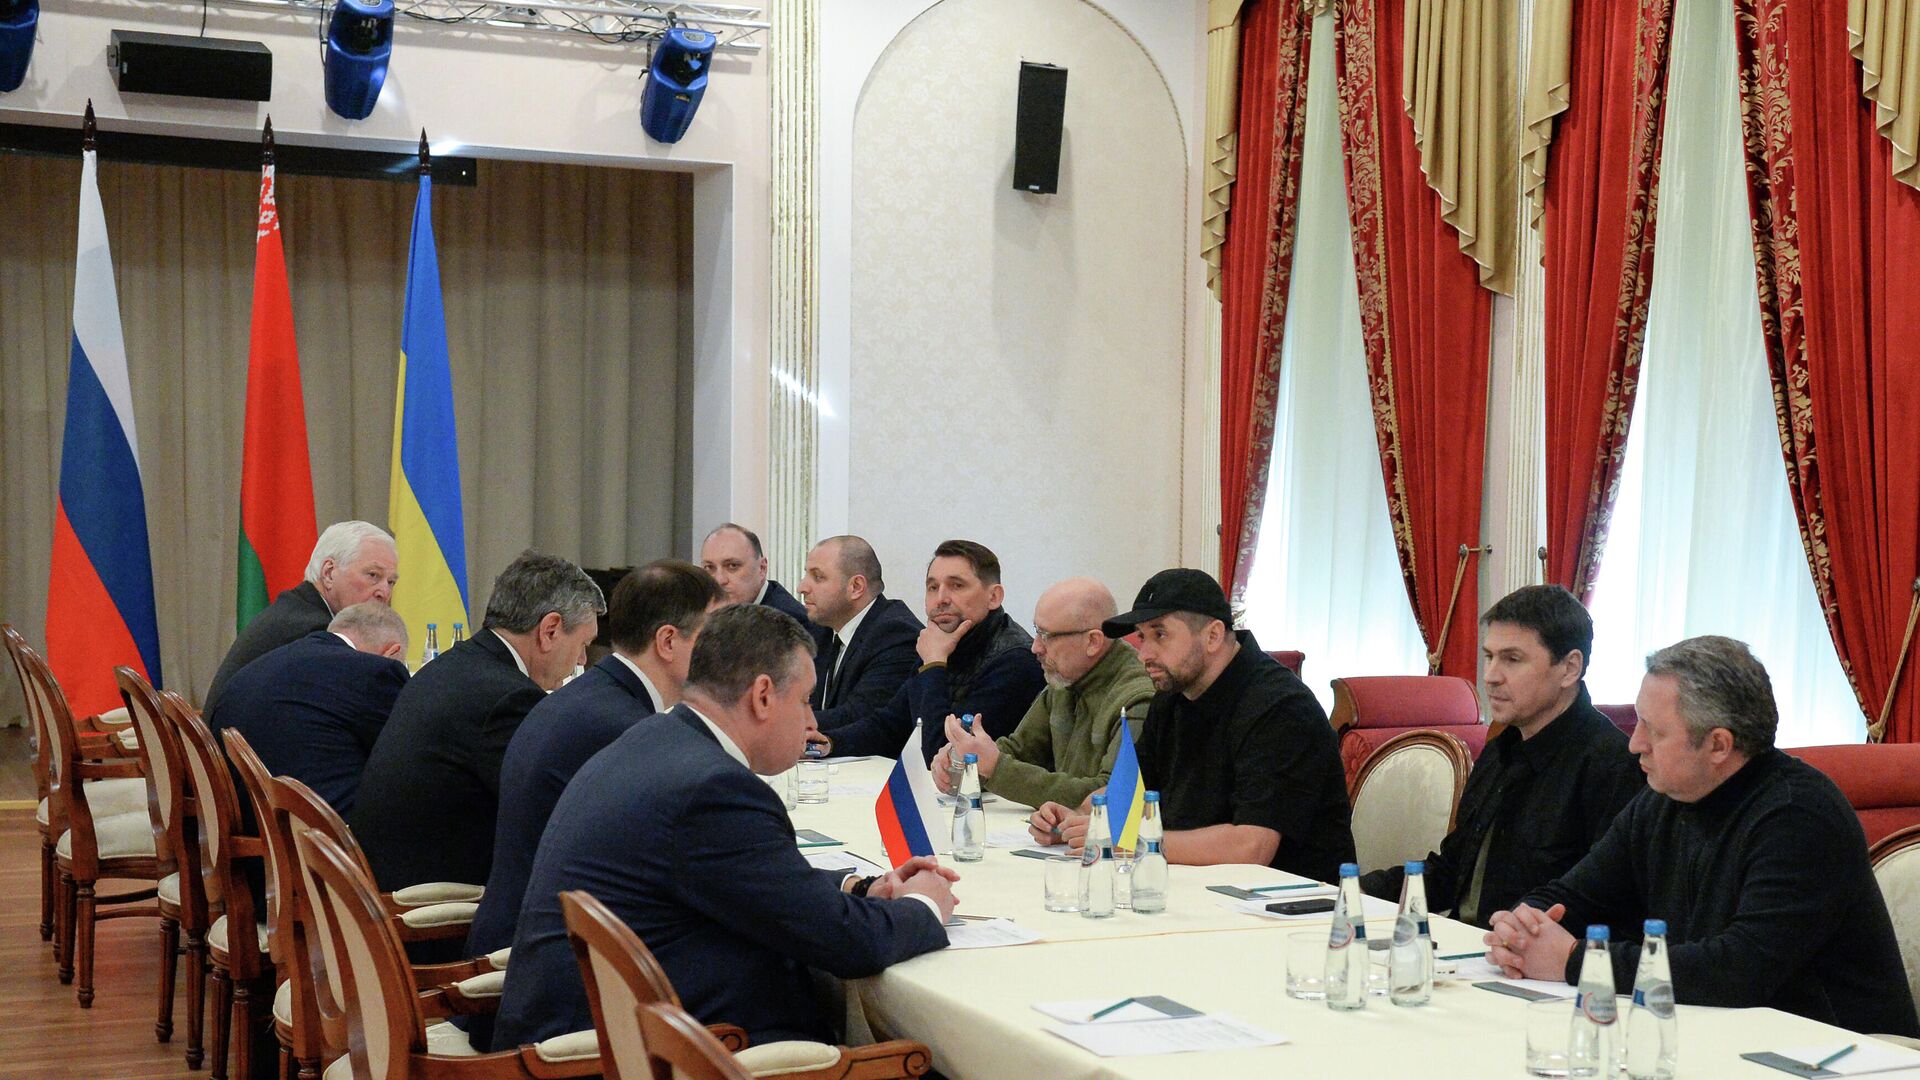 Russian-Ukrainian talks in Belarus aimed at resolving the conflict between the two countries. - Sputnik International, 1920, 28.02.2022